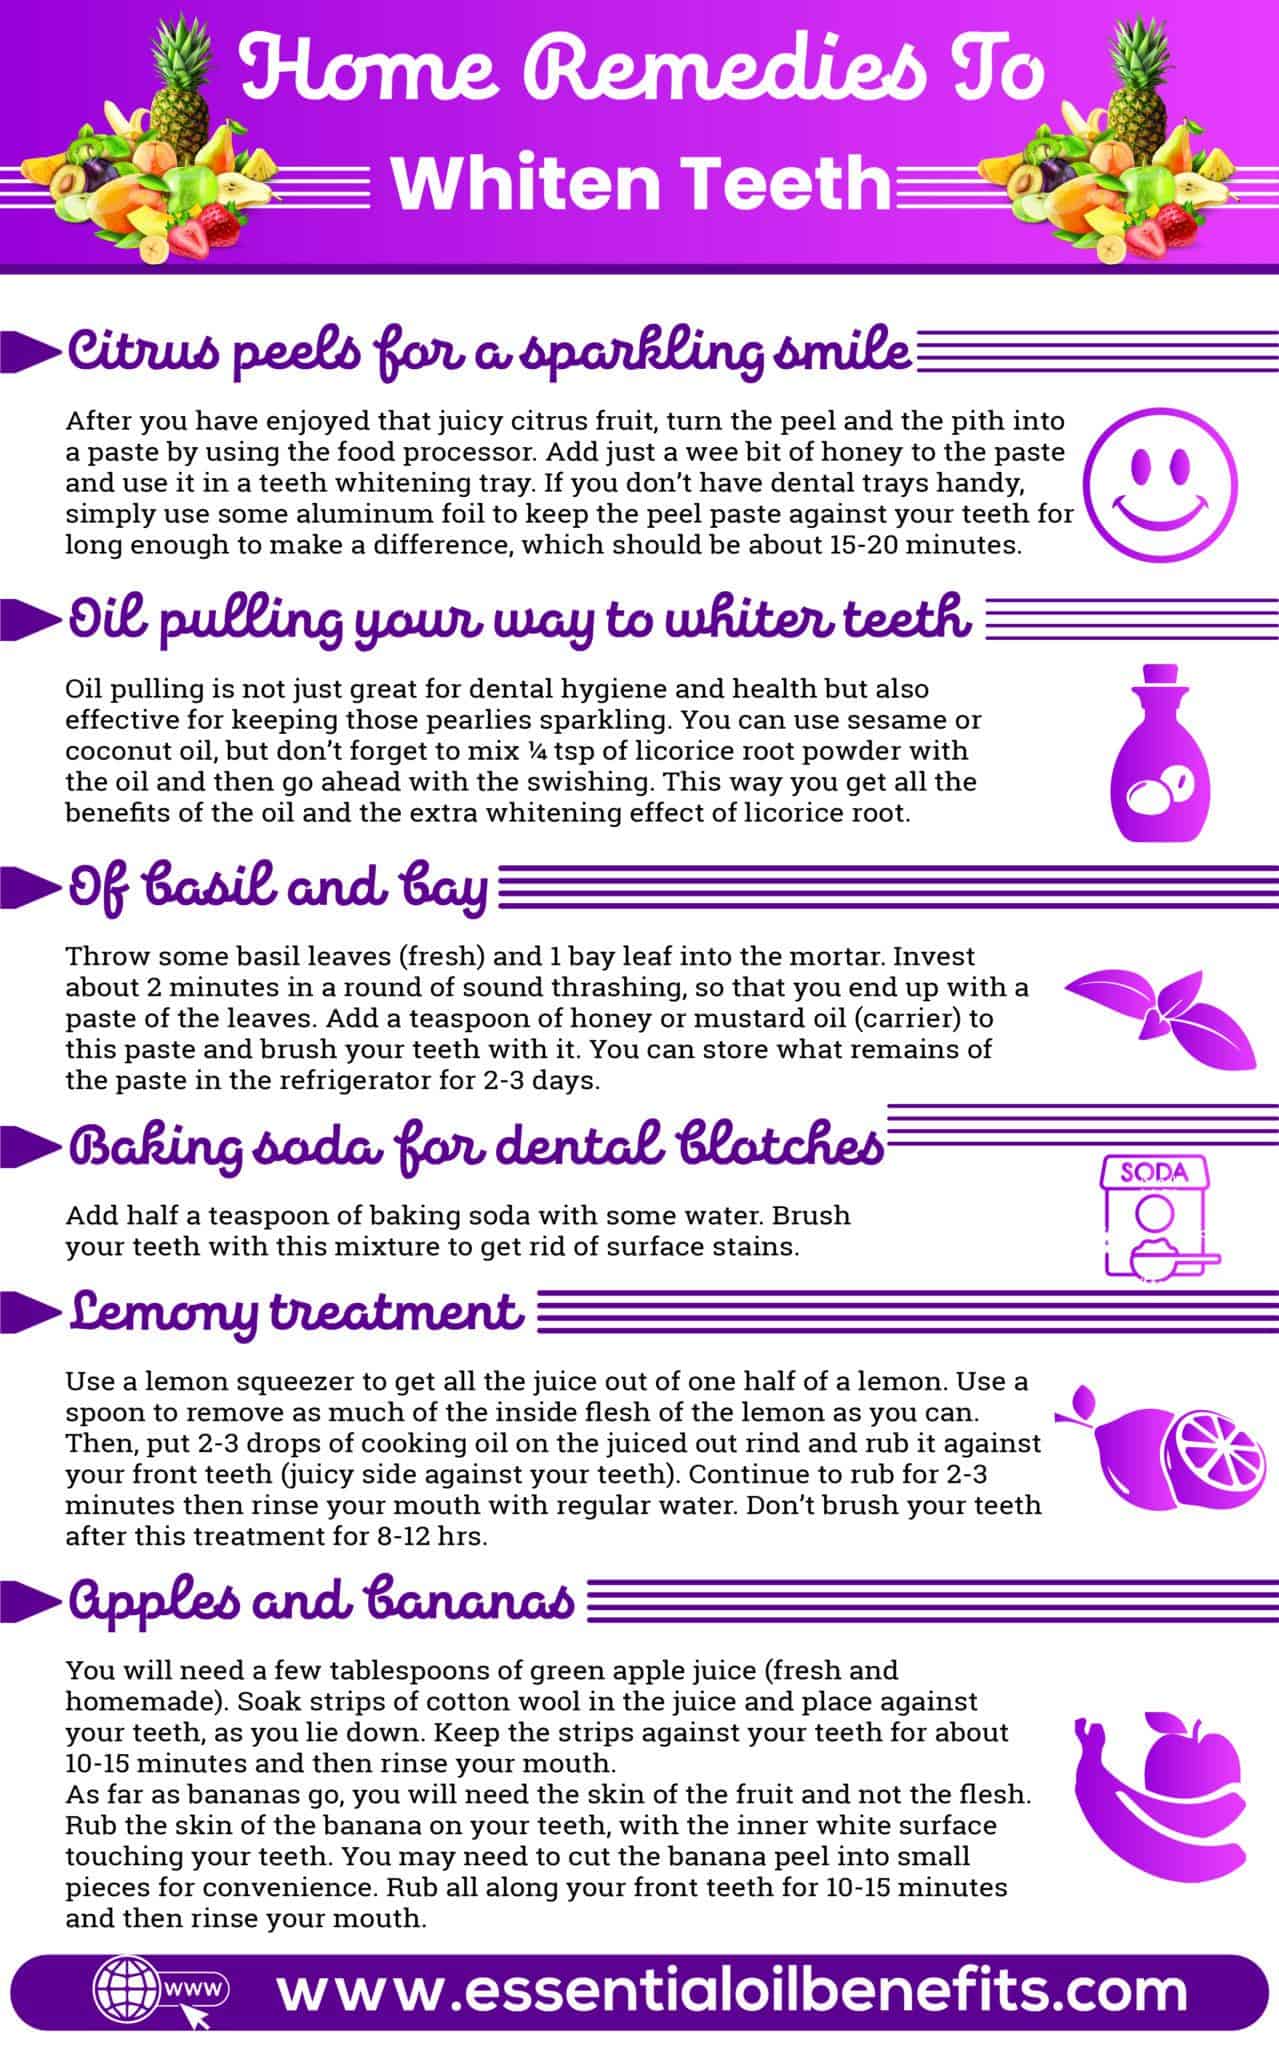 How To Whiten Teeth With Essential Oils Essential Oil Benefits